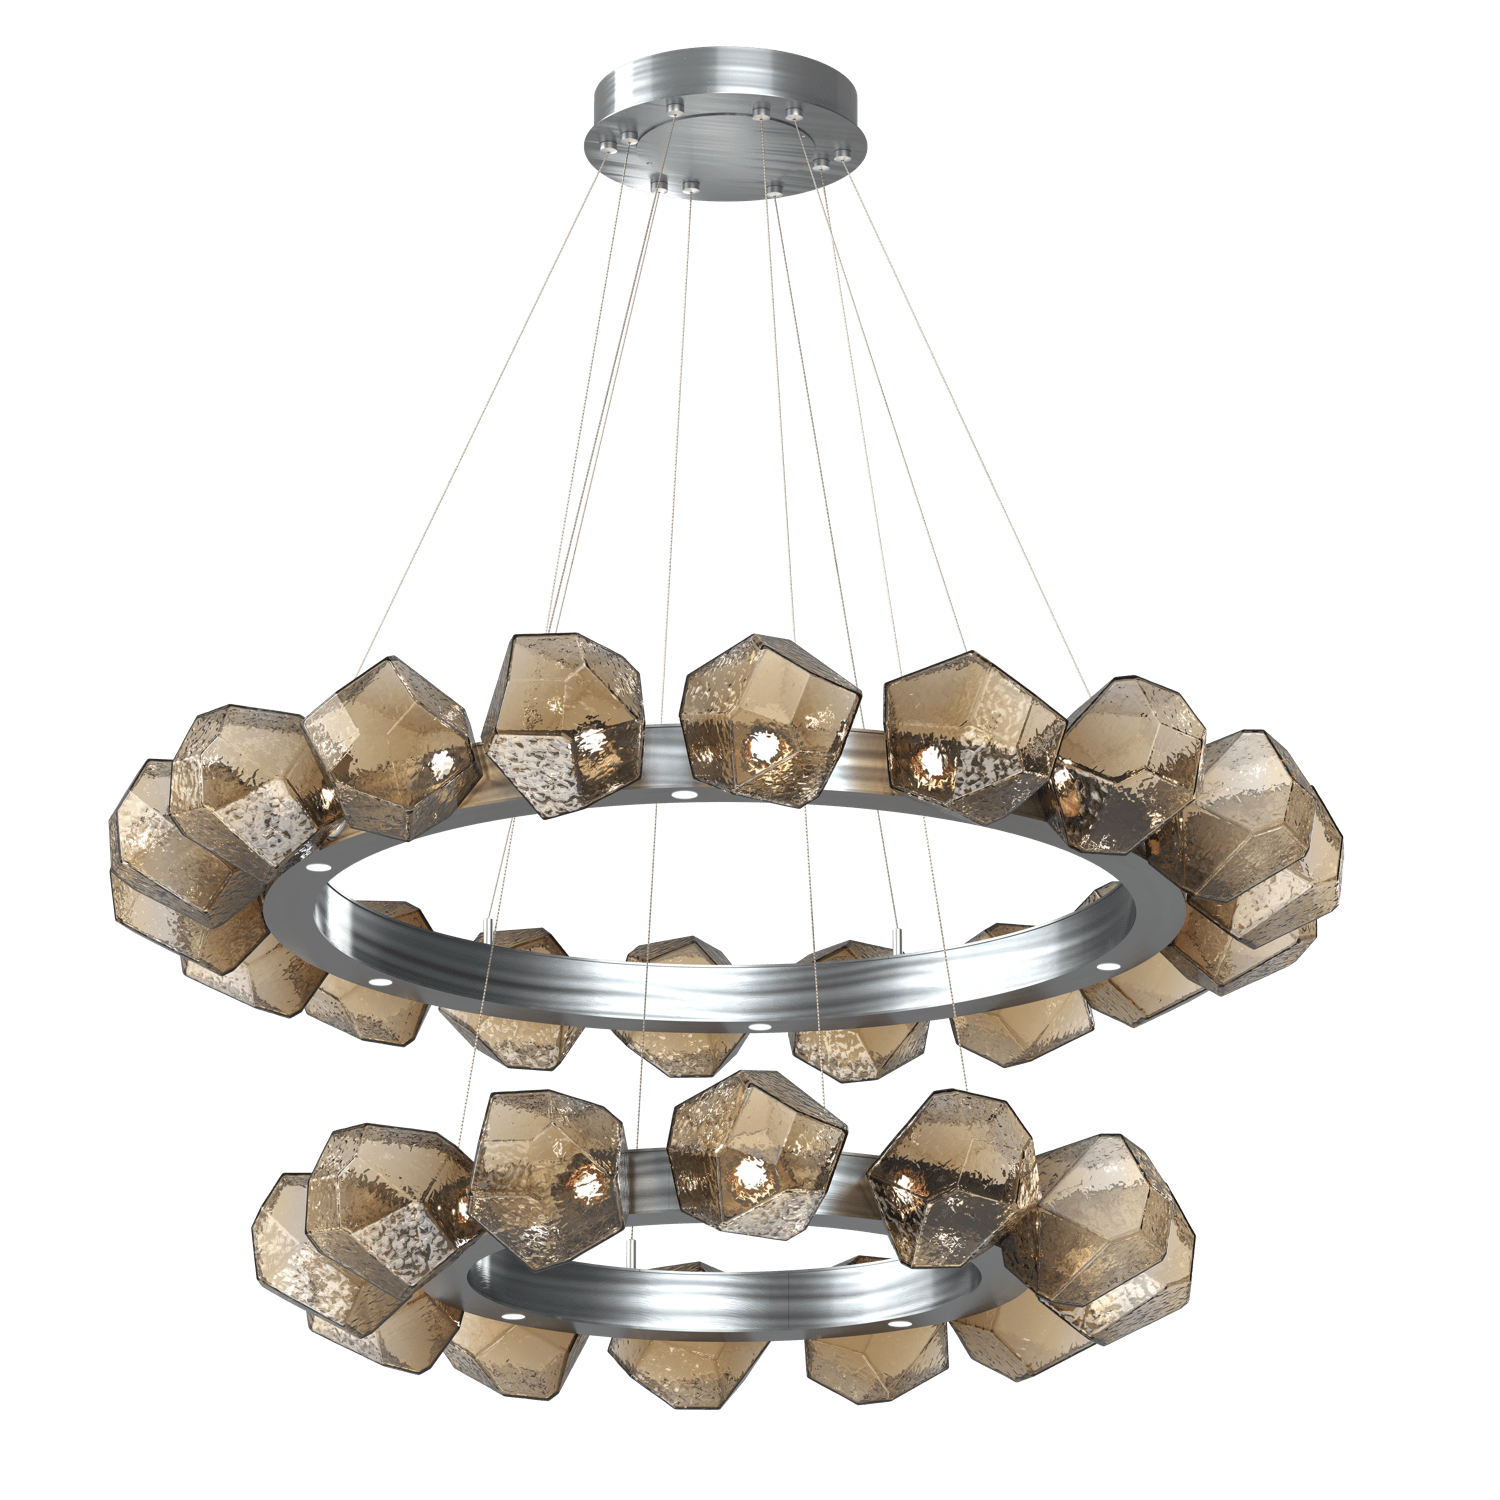 CHB0039-2T-SN-B-Hammerton-Studio-Gem-48-inch-two-tier-radial-ring-chandelier-with-satin-nickel-finish-and-bronze-blown-glass-shades-and-LED-lamping